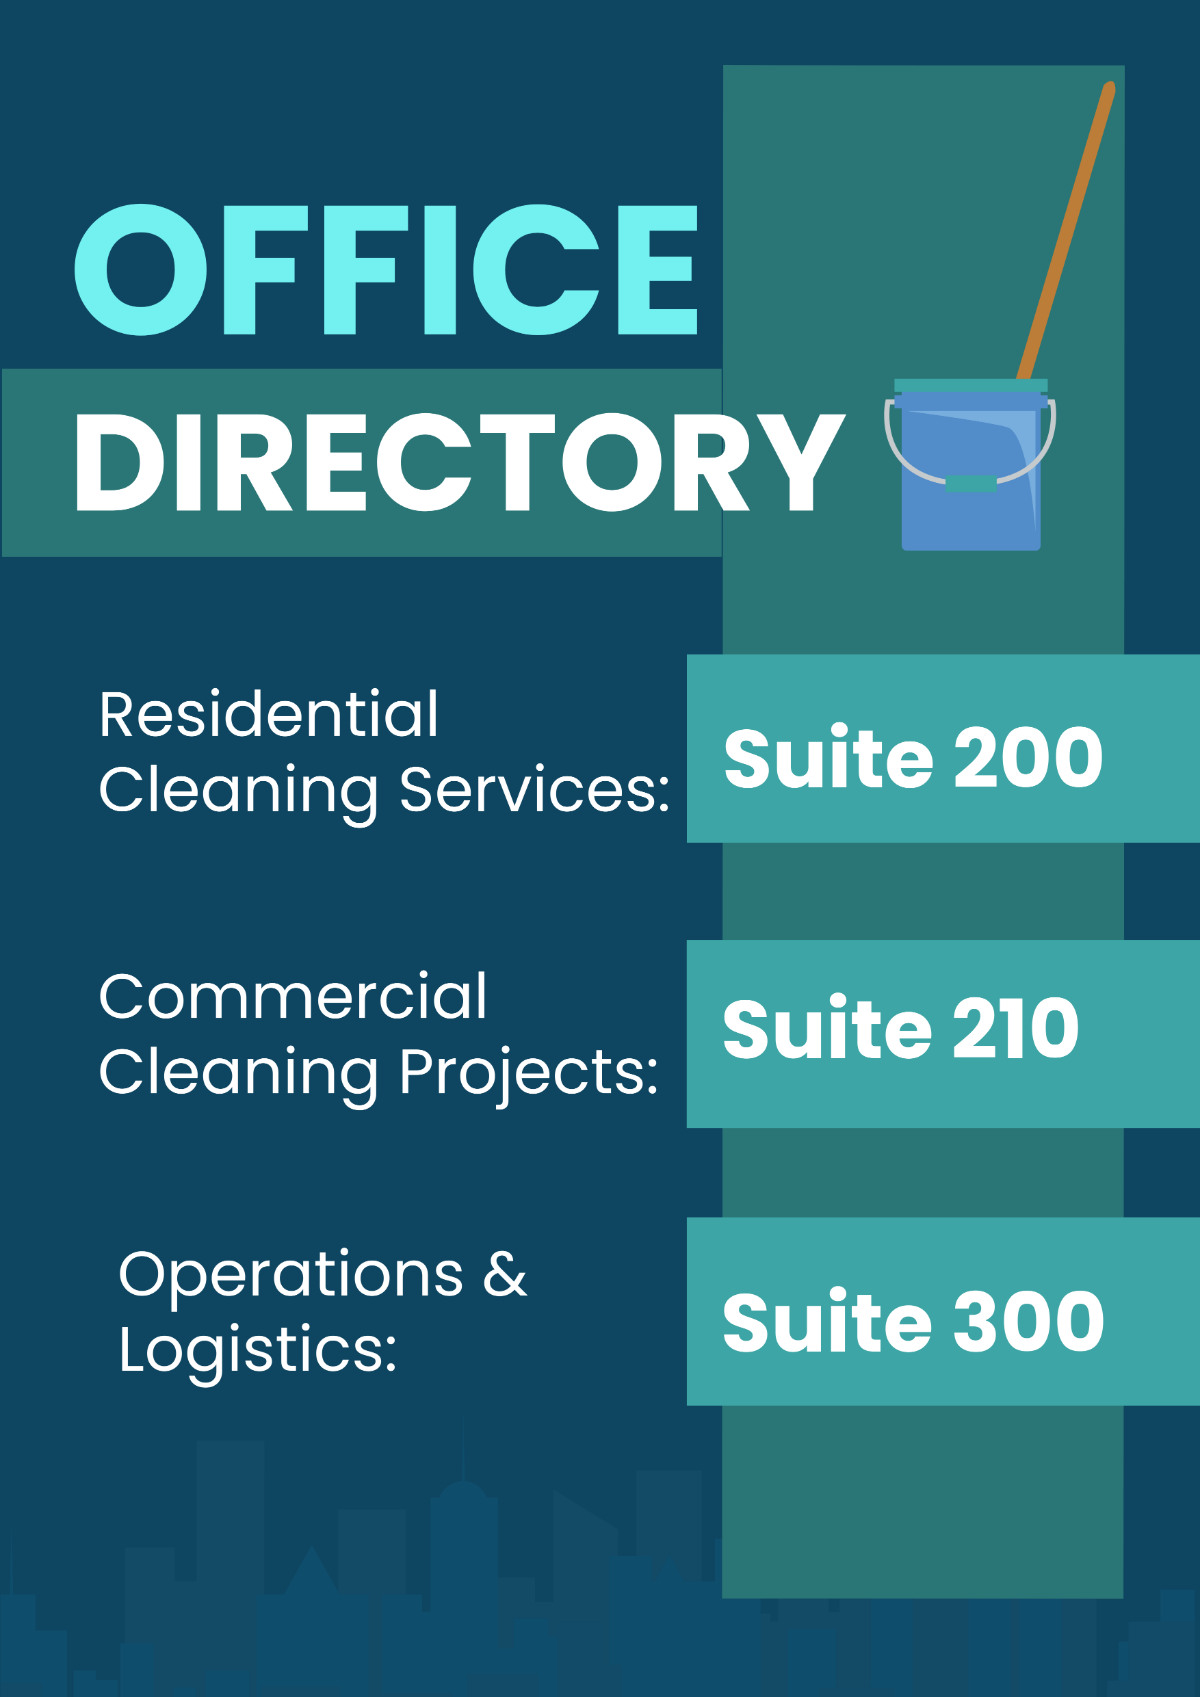 Cleaning Services Office Directory and Departmental Sign